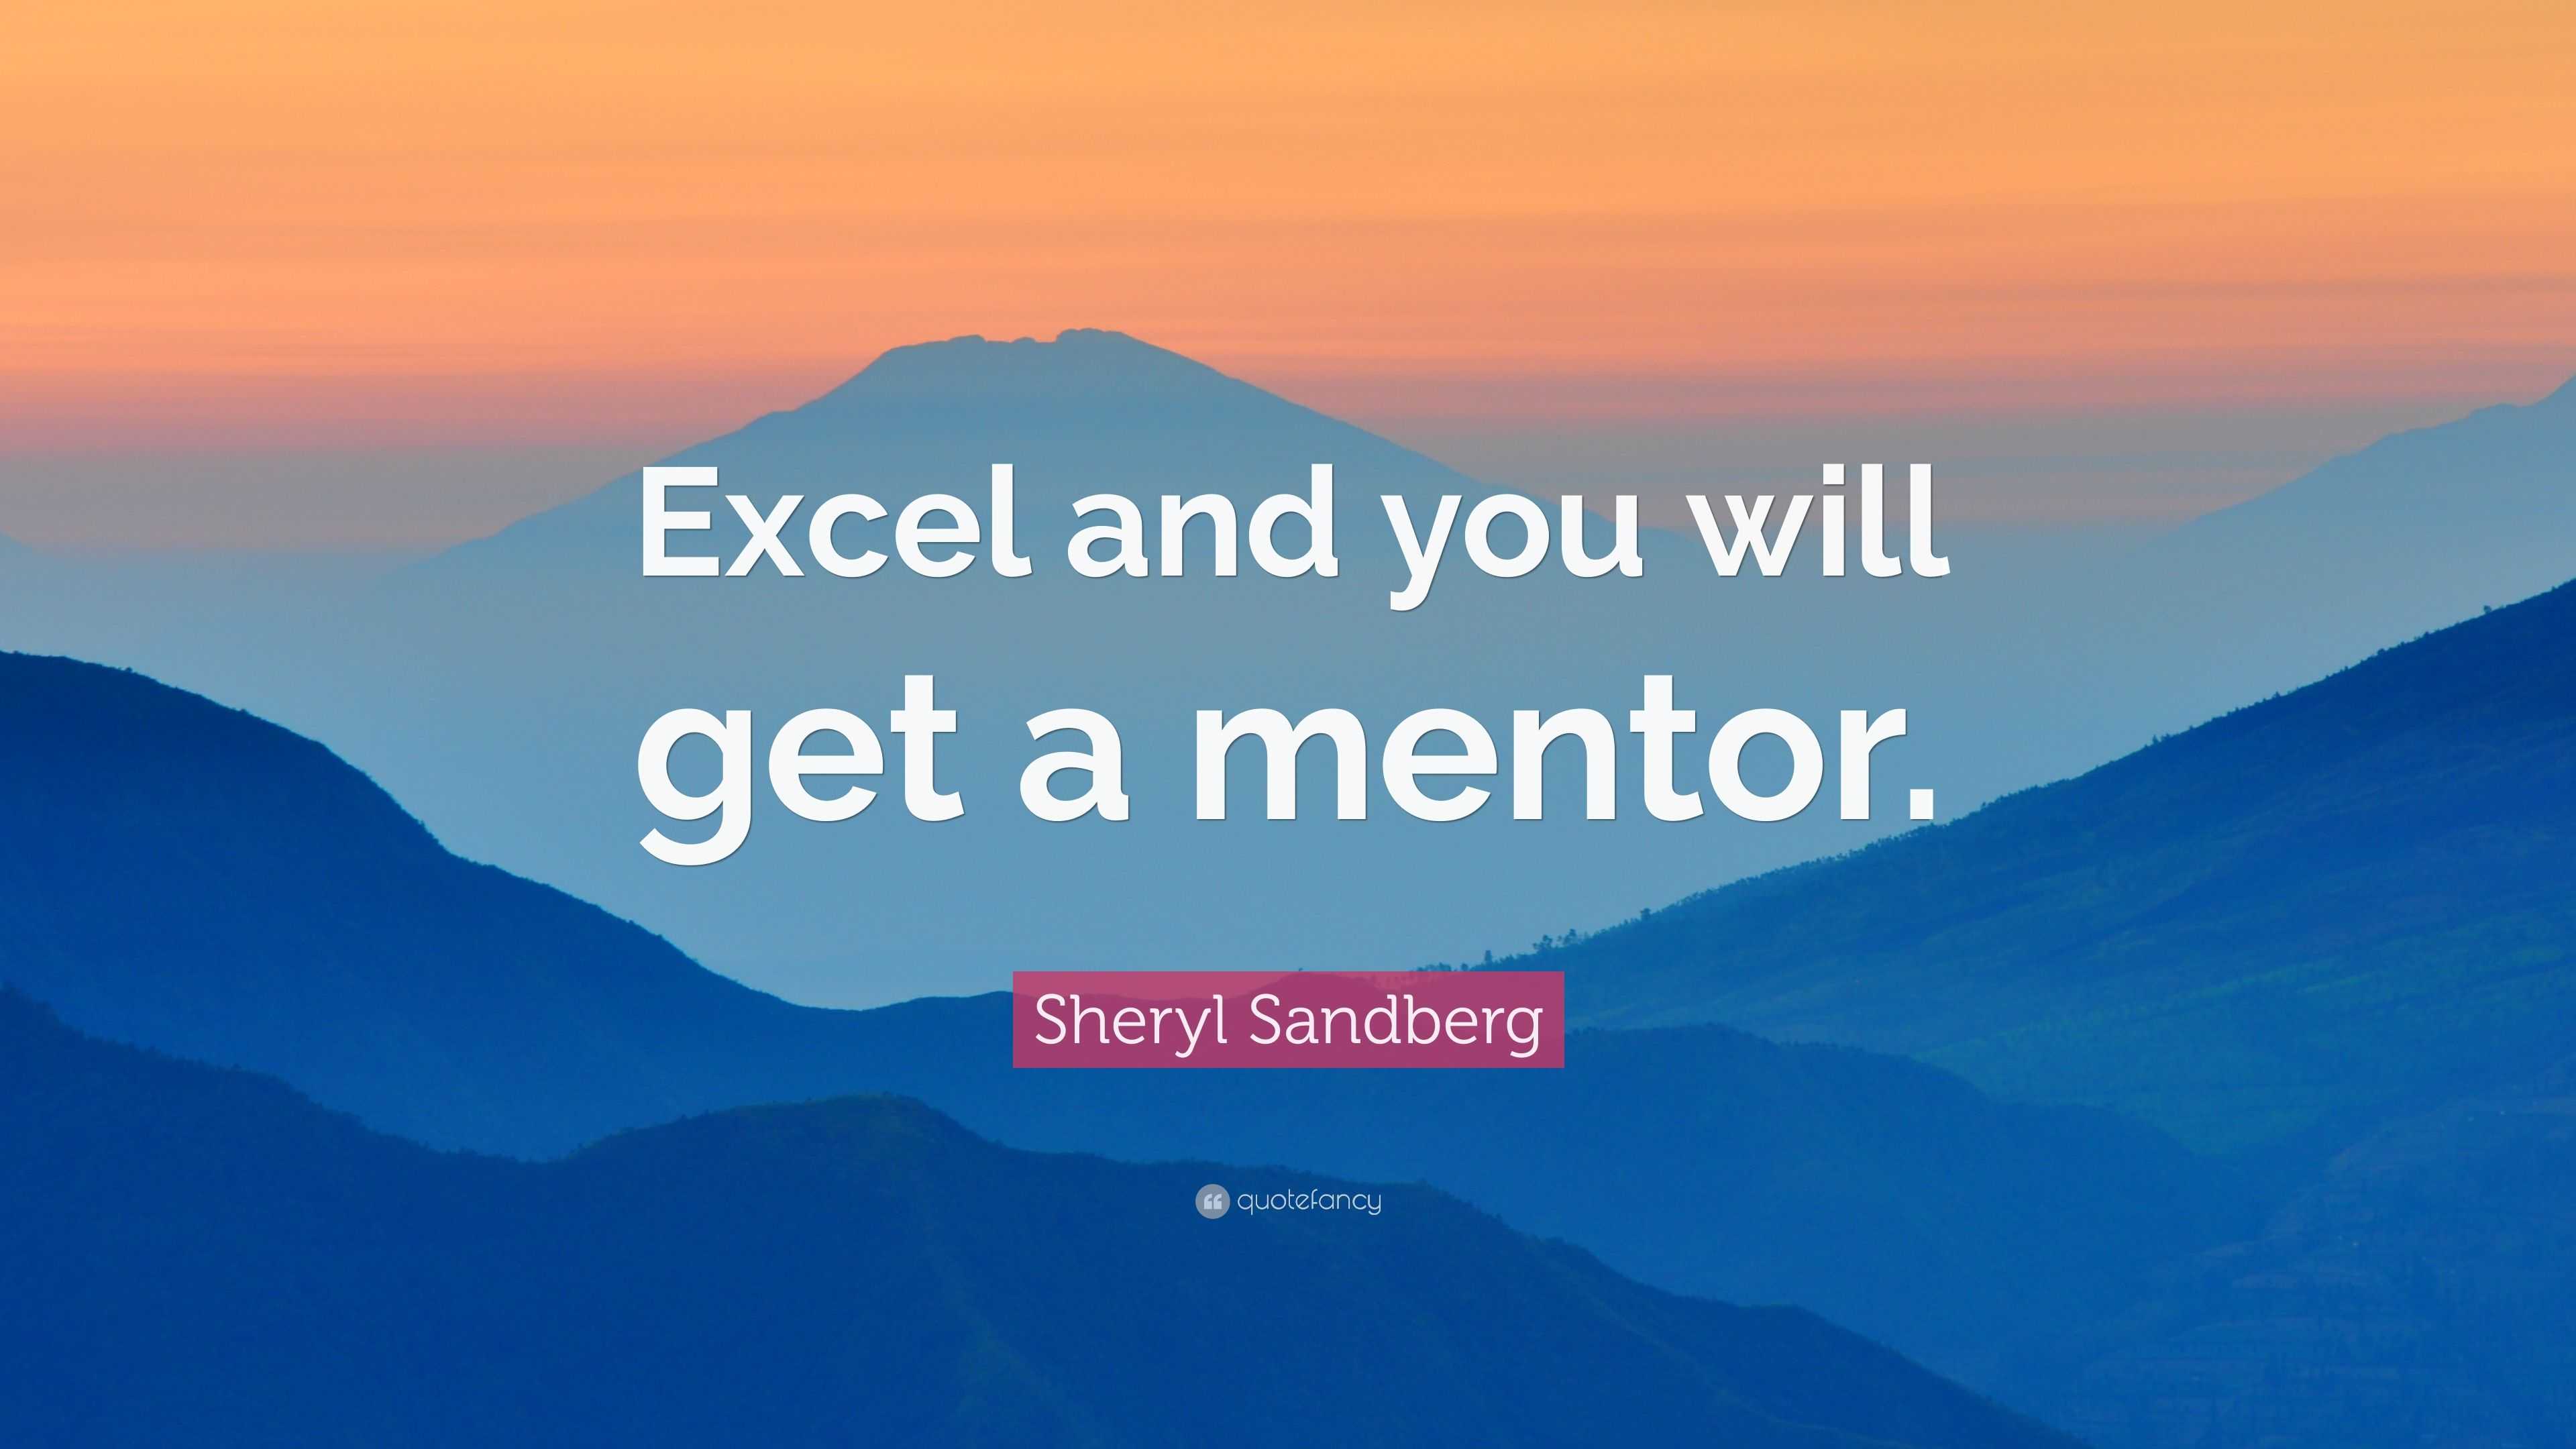 Sandberg Quote: “Excel will get a mentor.”